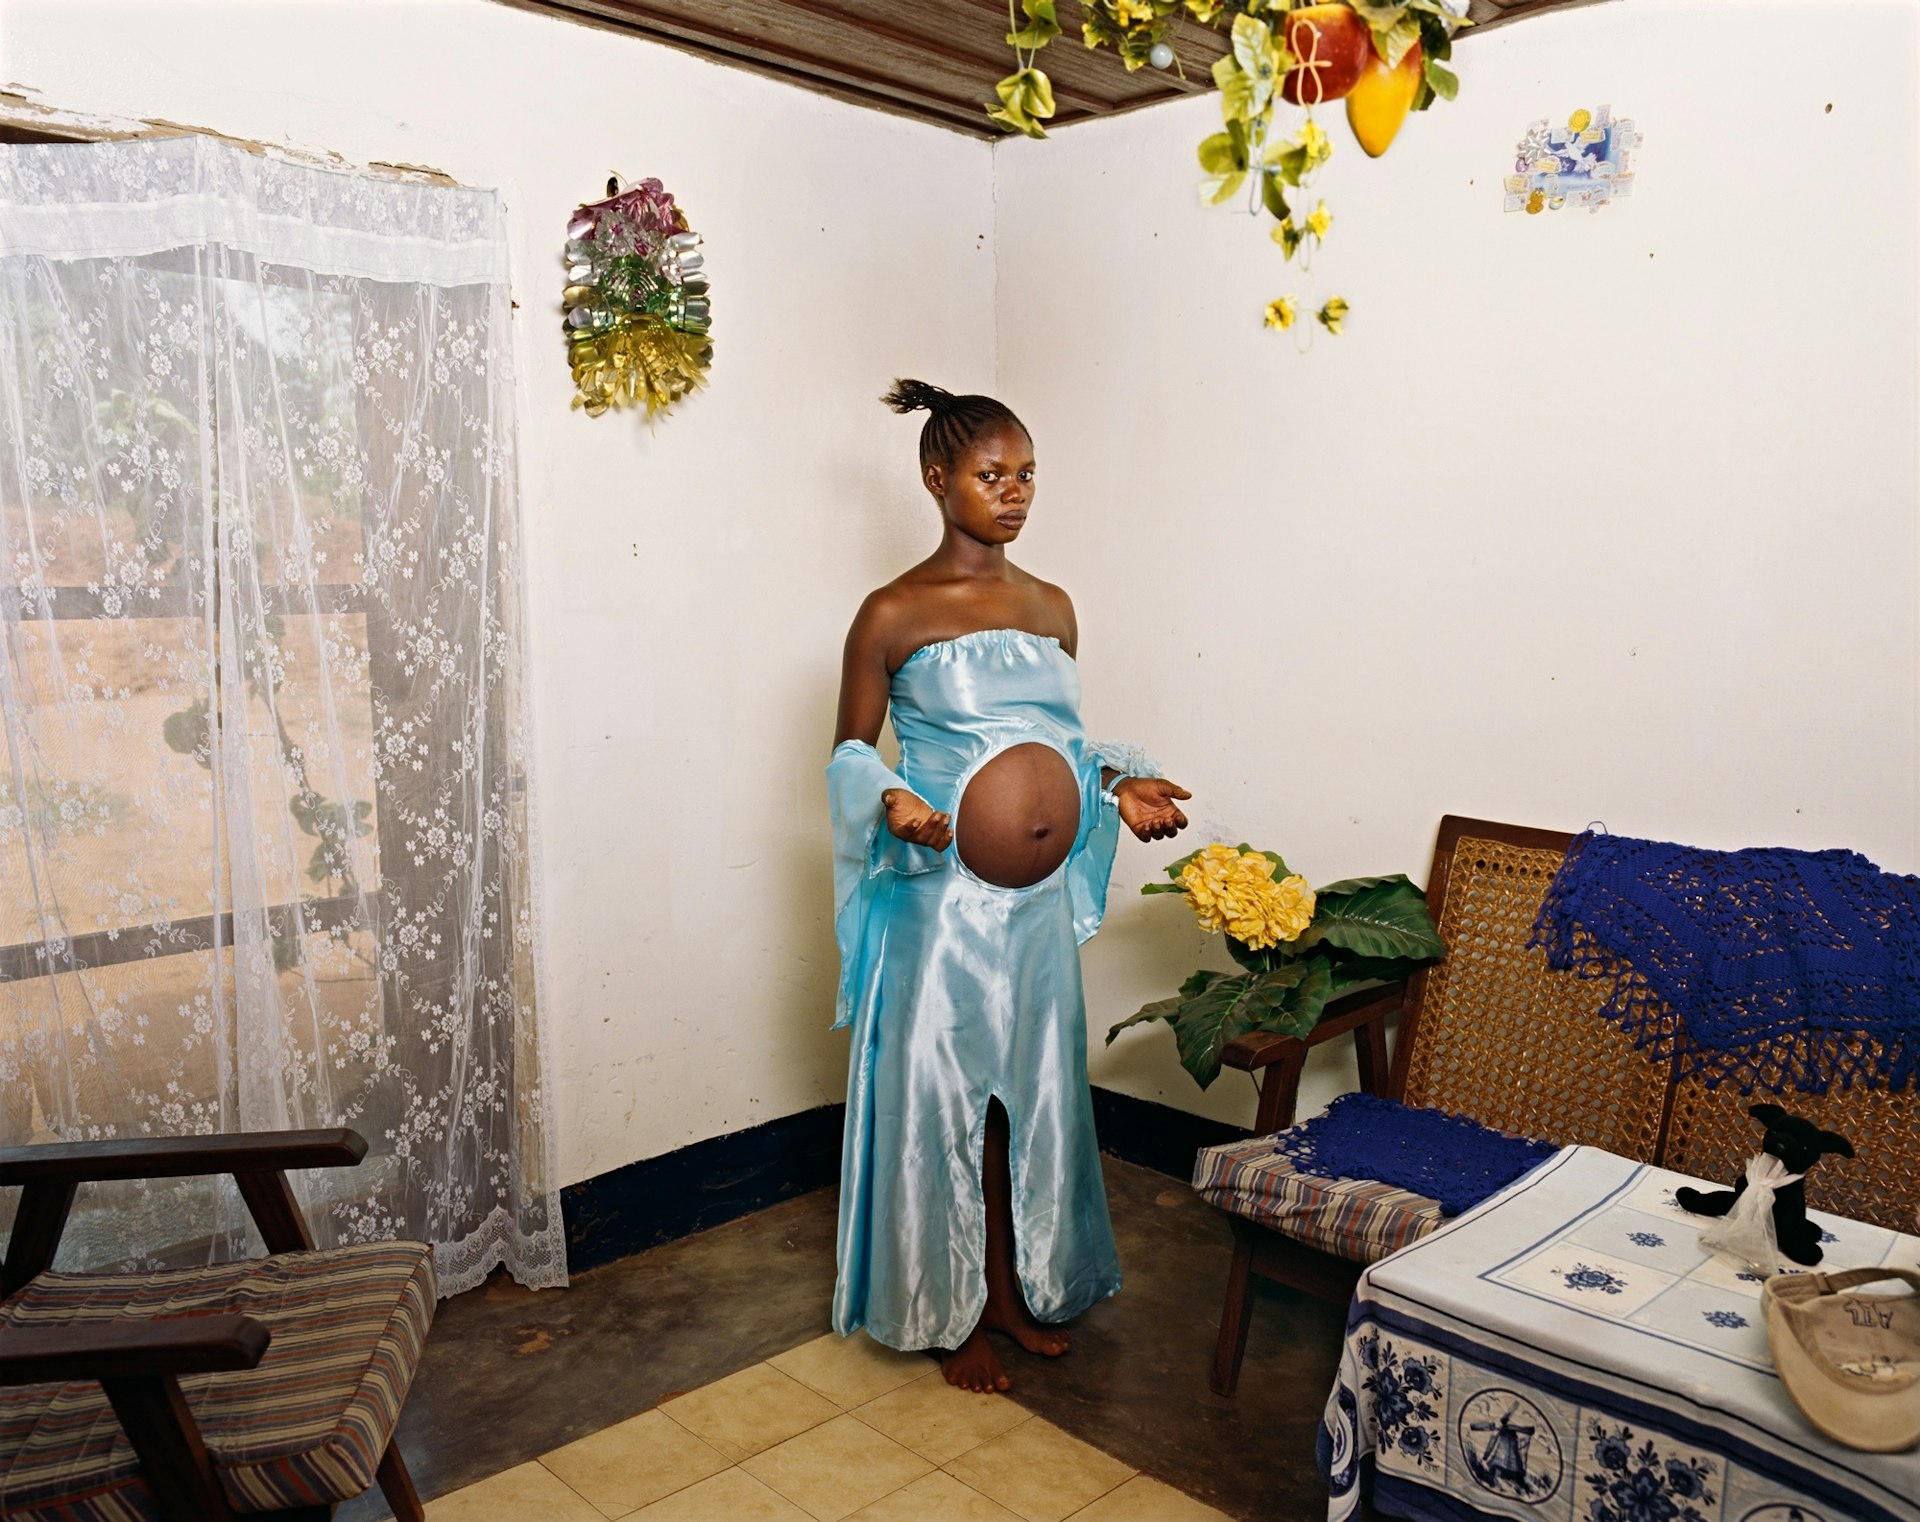 Deana Lawson’s mythical portraits of blackness